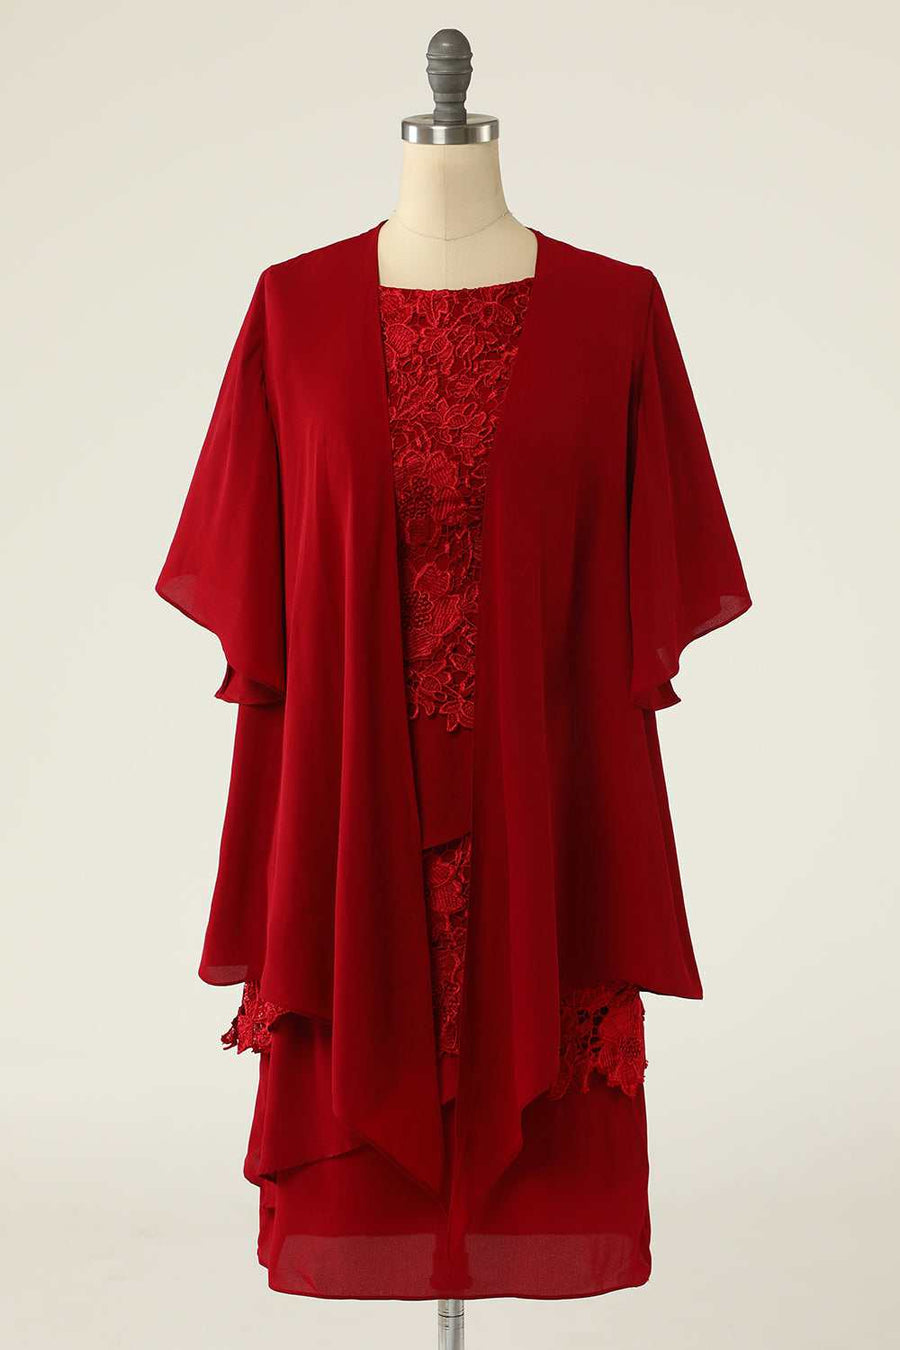 Two-Piece Red Lace Short Mother of the Bride Dress with Snap Cardigan